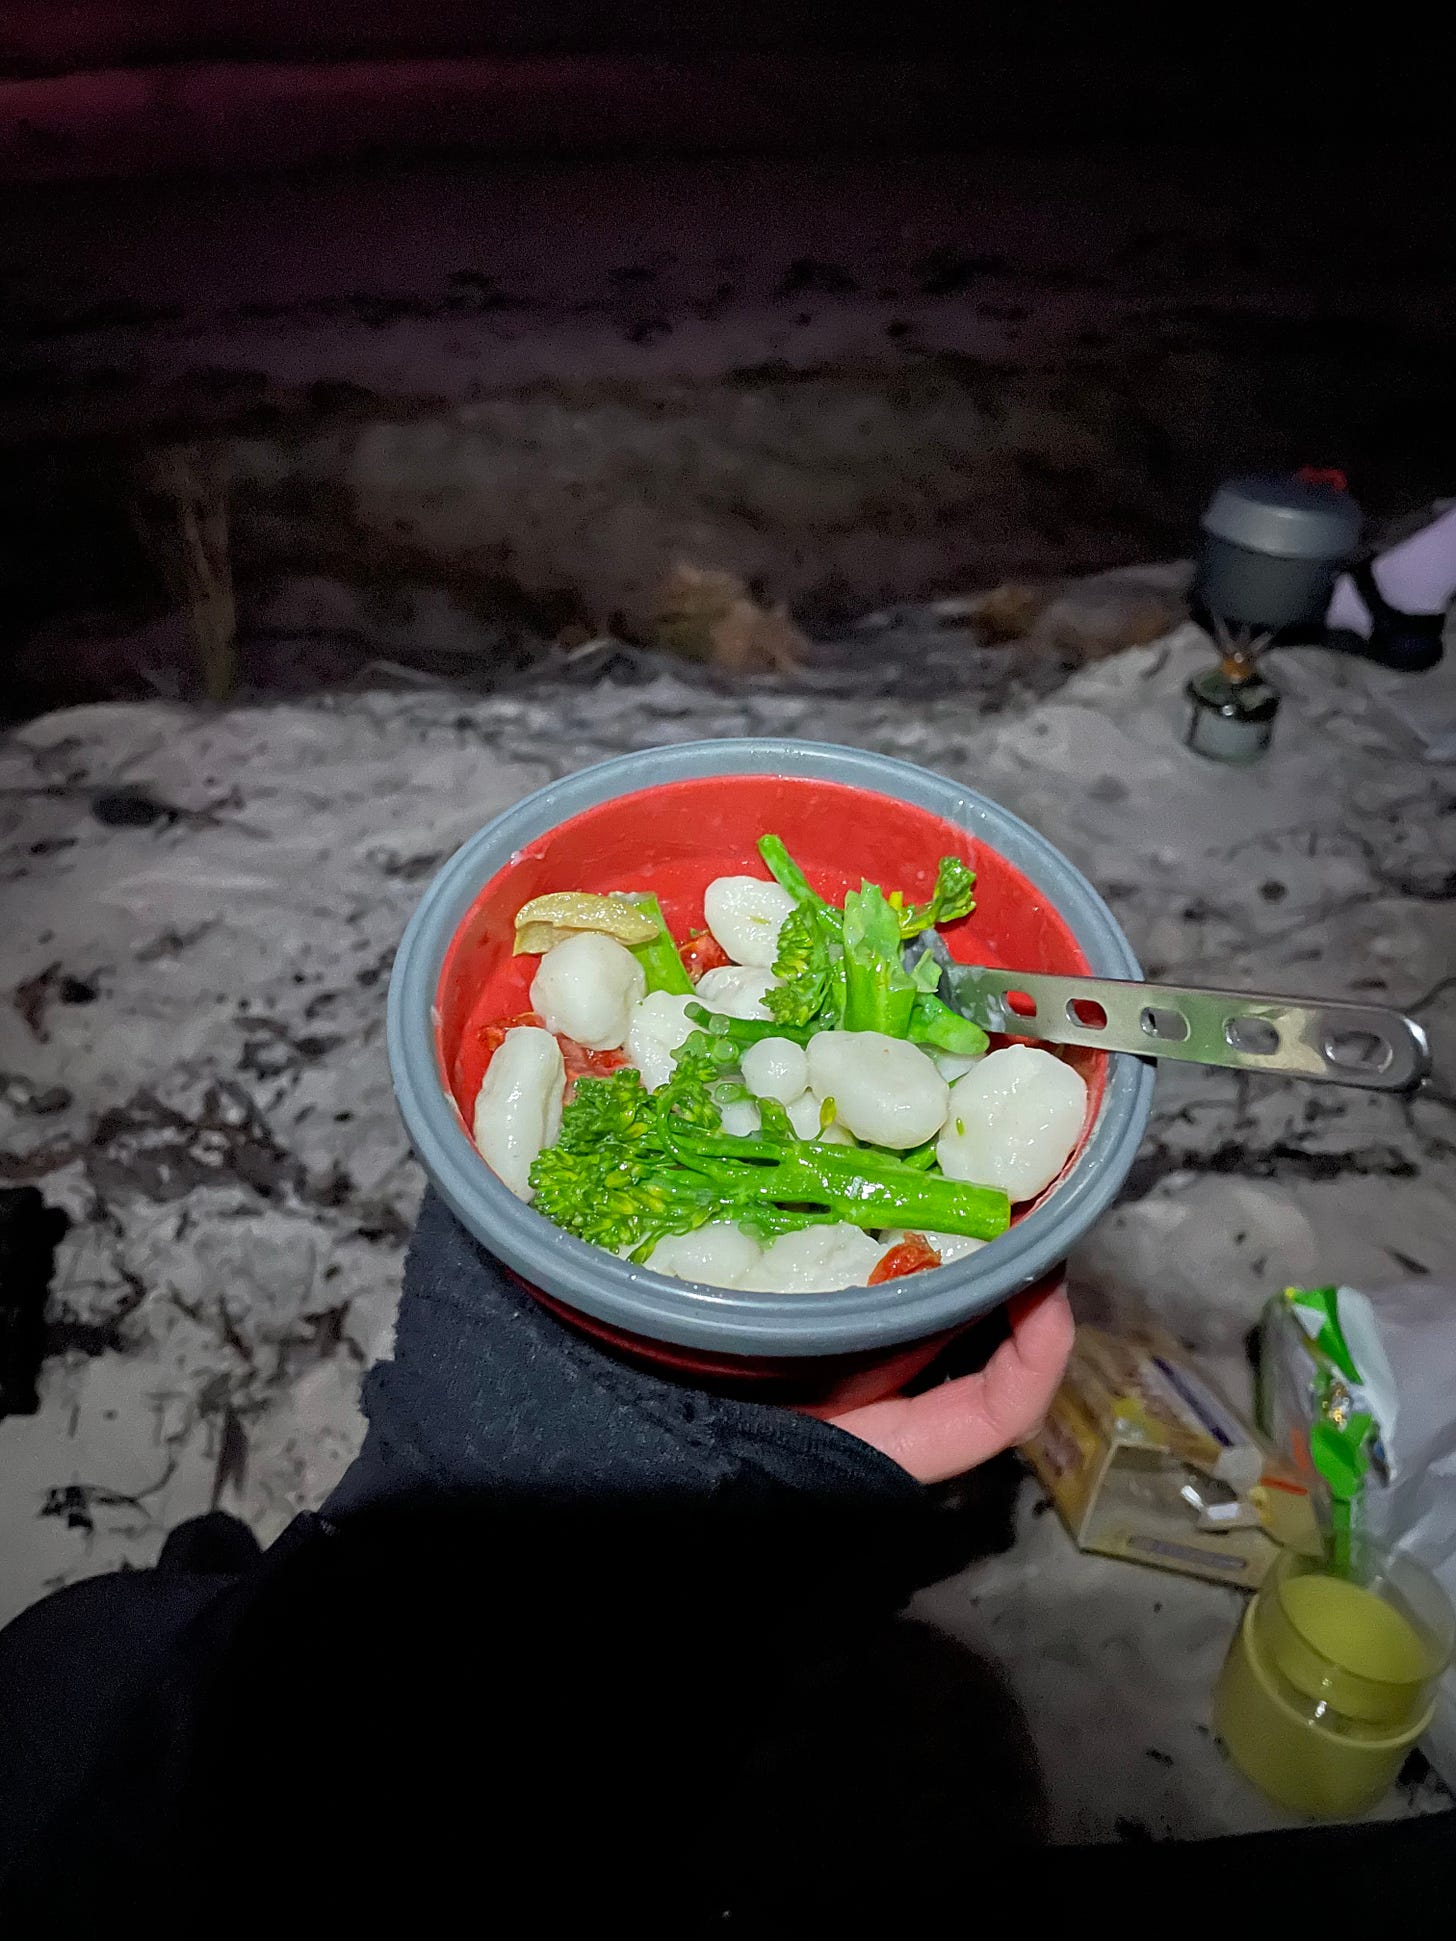 Gnocchi and broccolini in a collapsible bowl at a campsite at night.